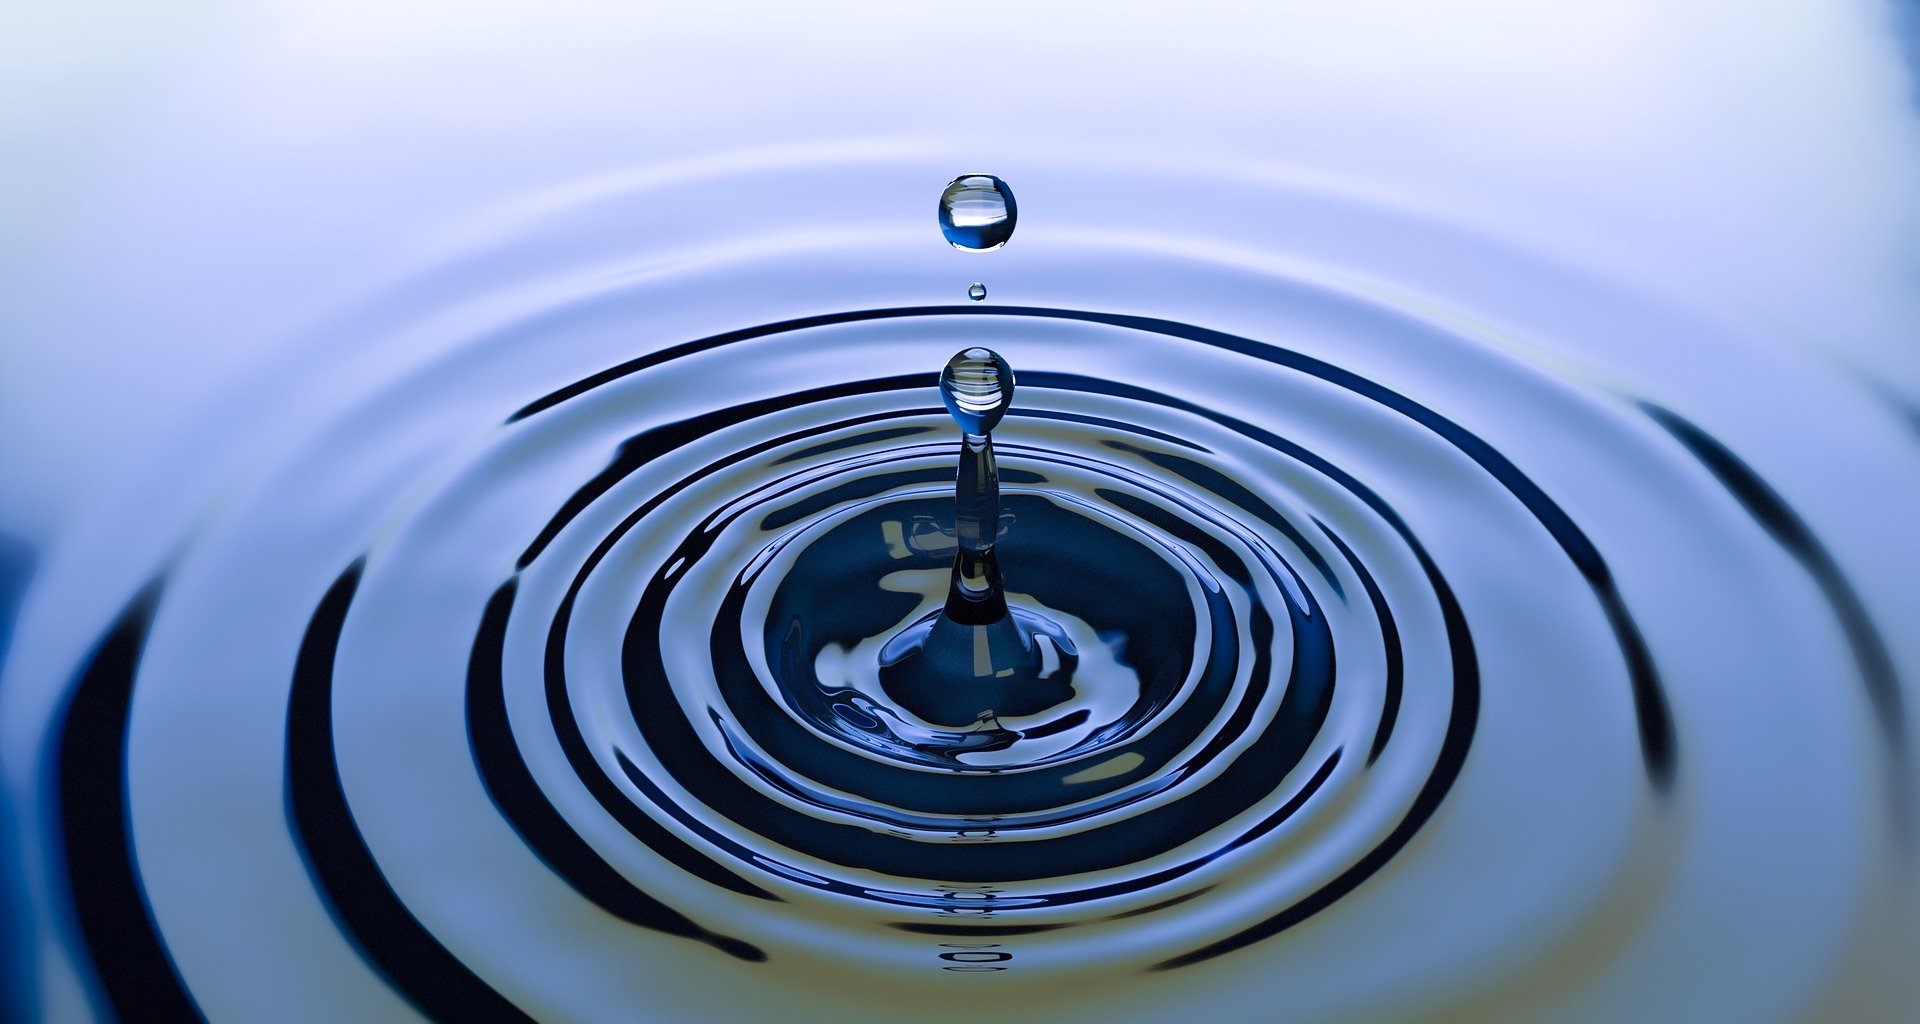 One drop of water above an expanding ripple on the surface of blue water.